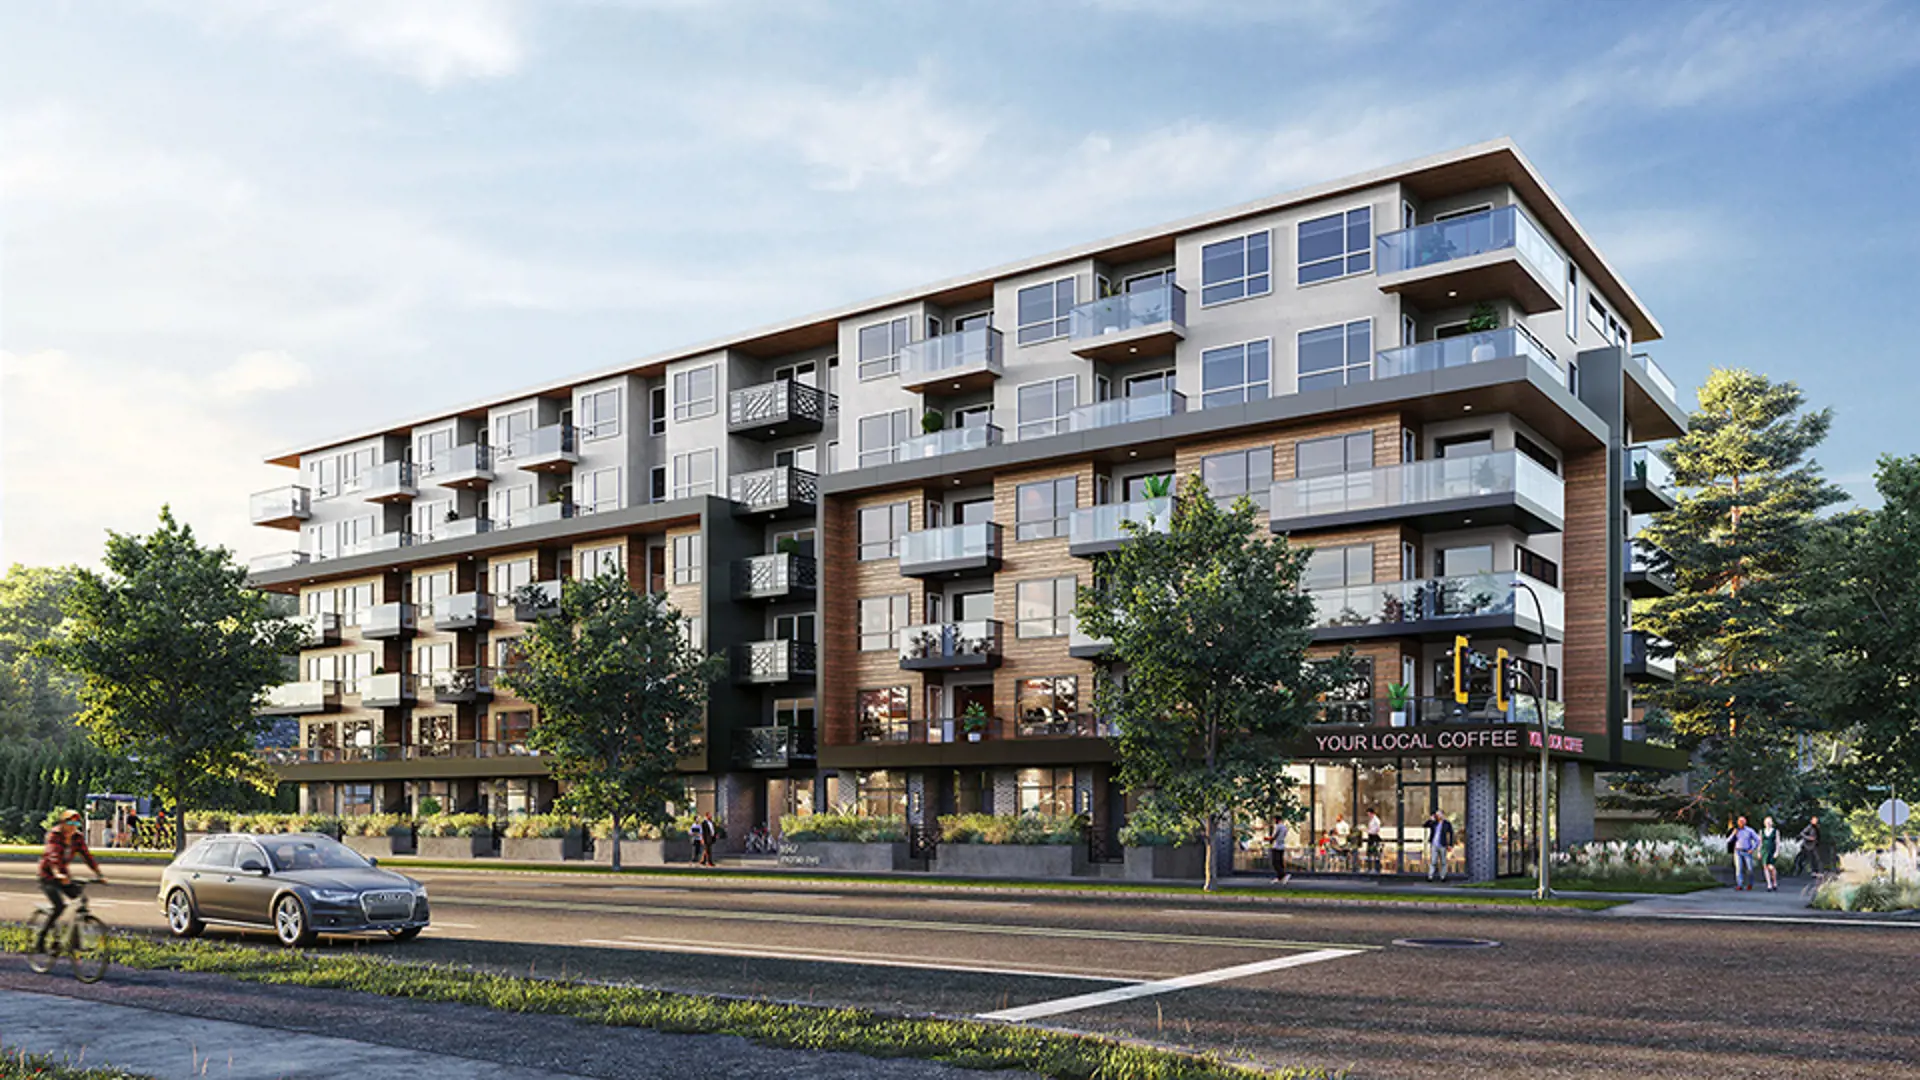 Oak & Stone Saanich is a mixed-use, 6-storey Saanich mid-rise with 87 condos.